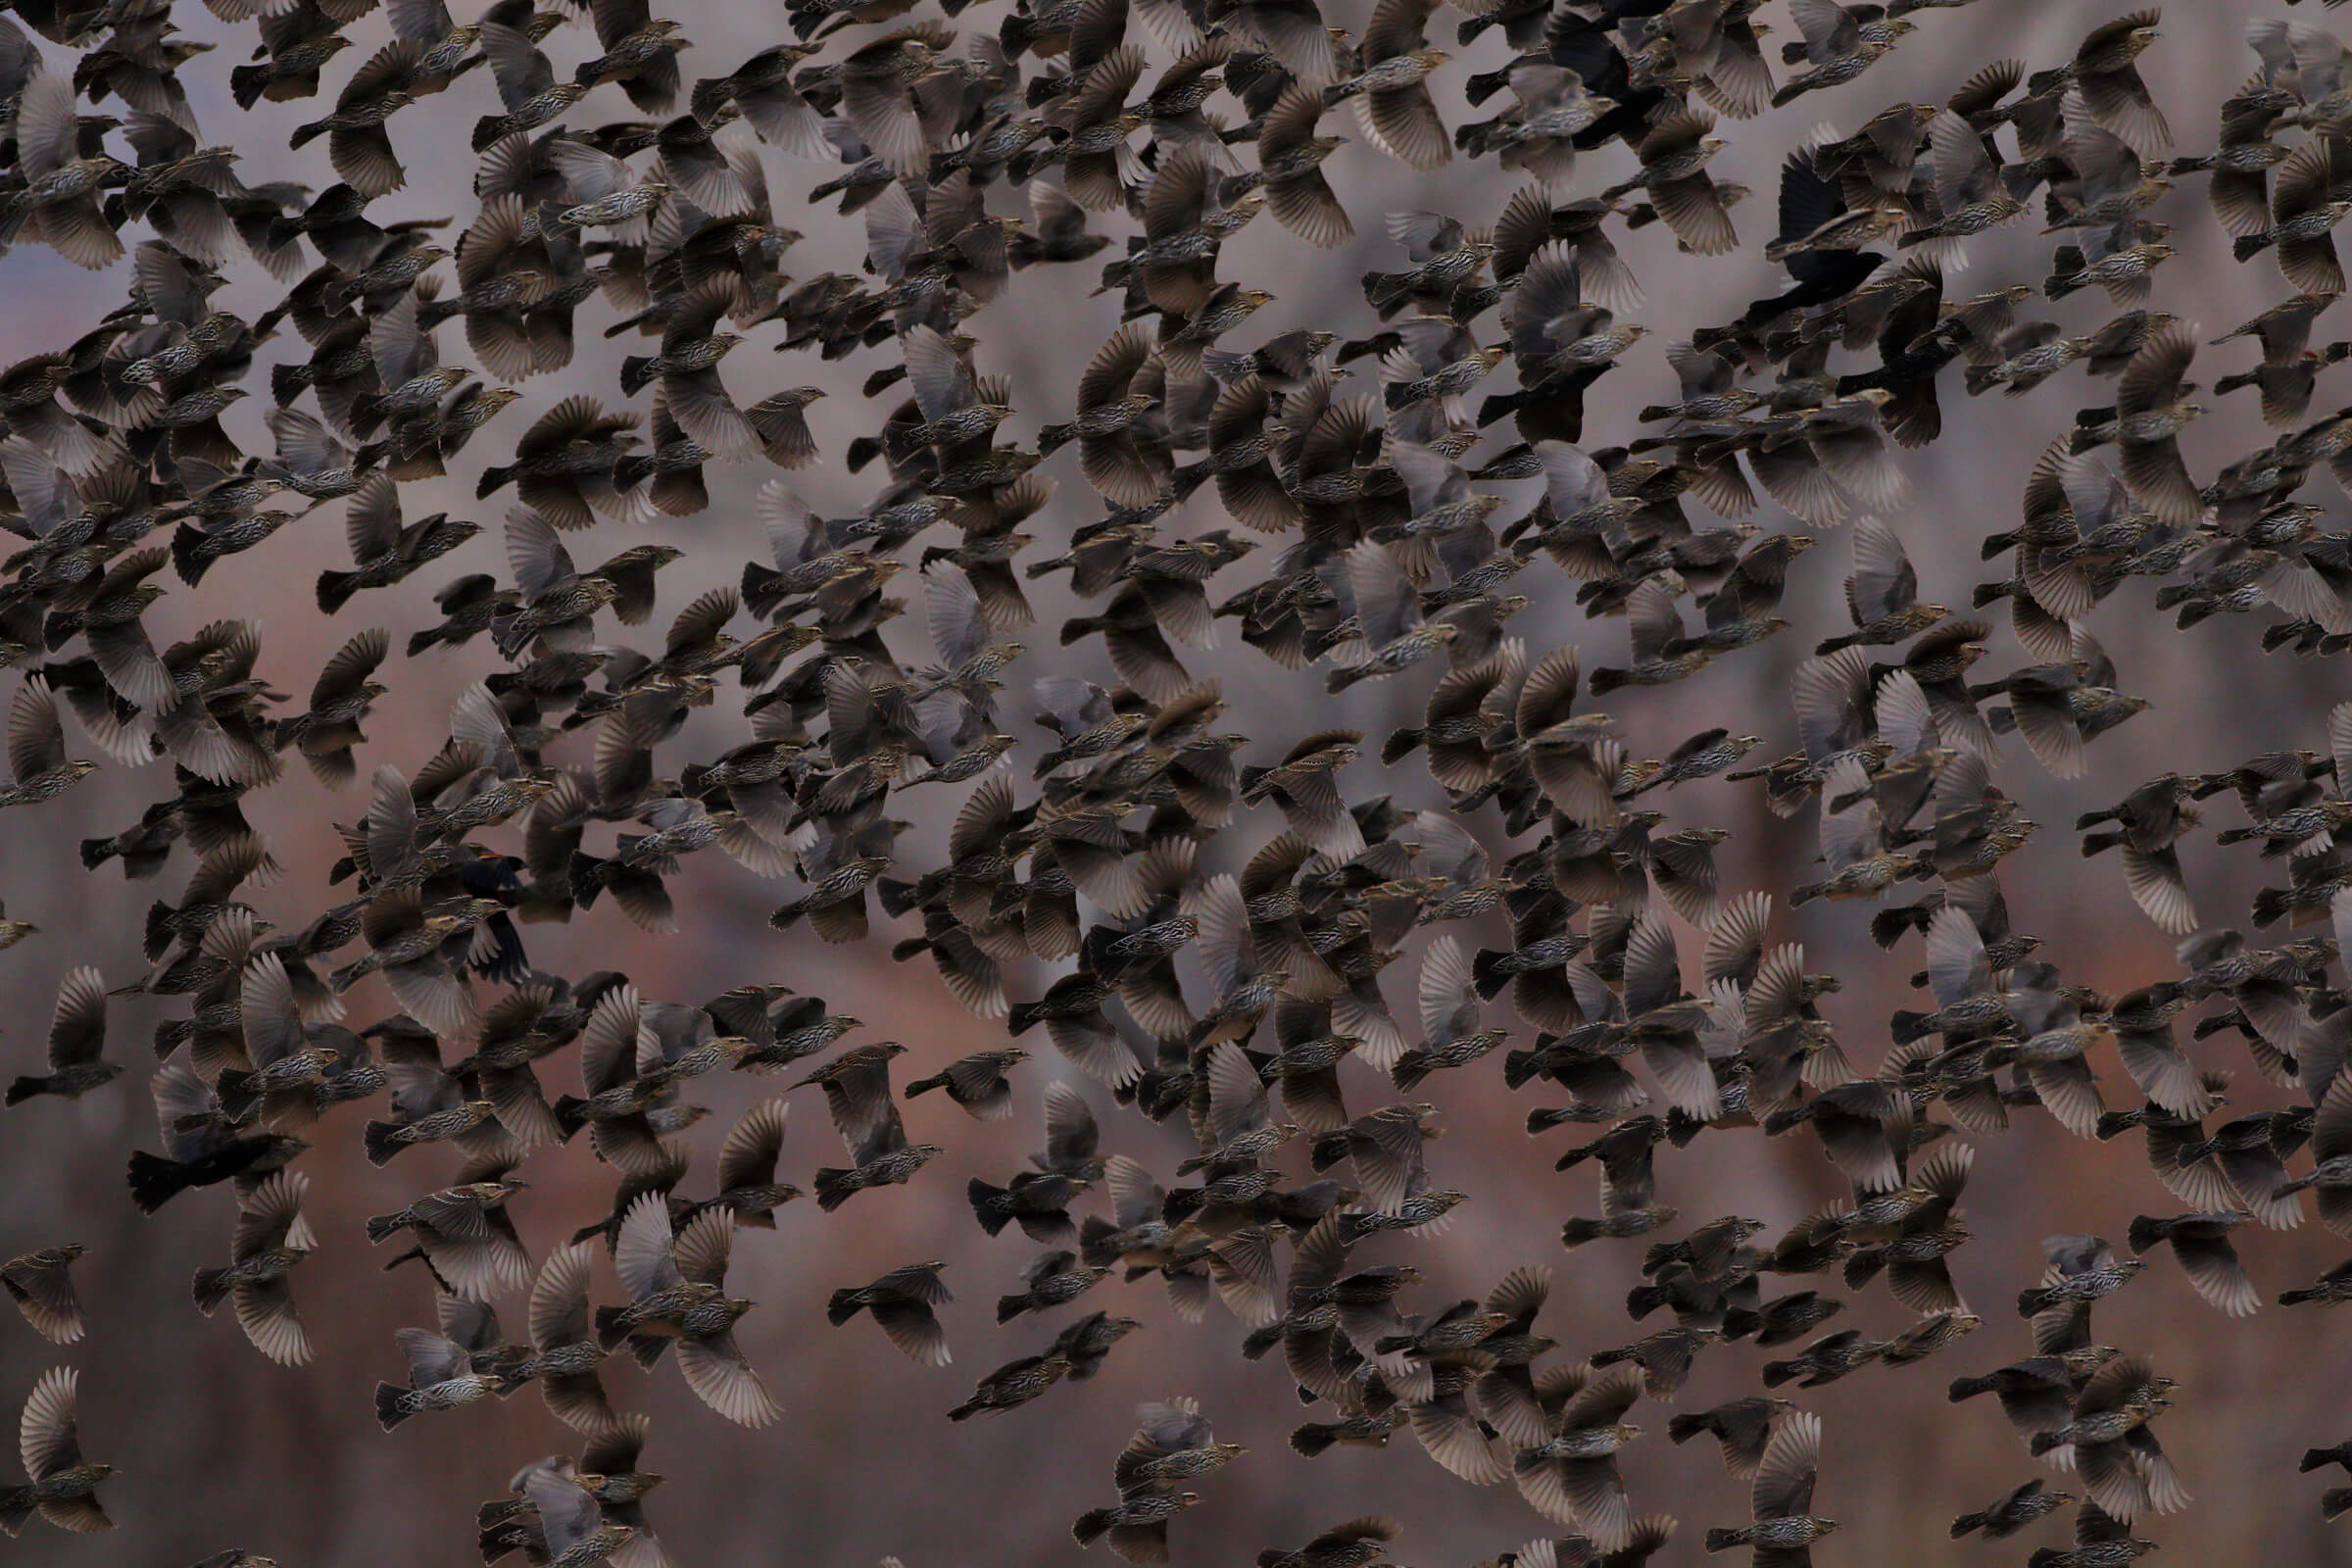 A huge flock of black and brown birds fly together across the frame of the picture all in the same direction. You can't see much behind them because there are so many, like a cloud of birds. 